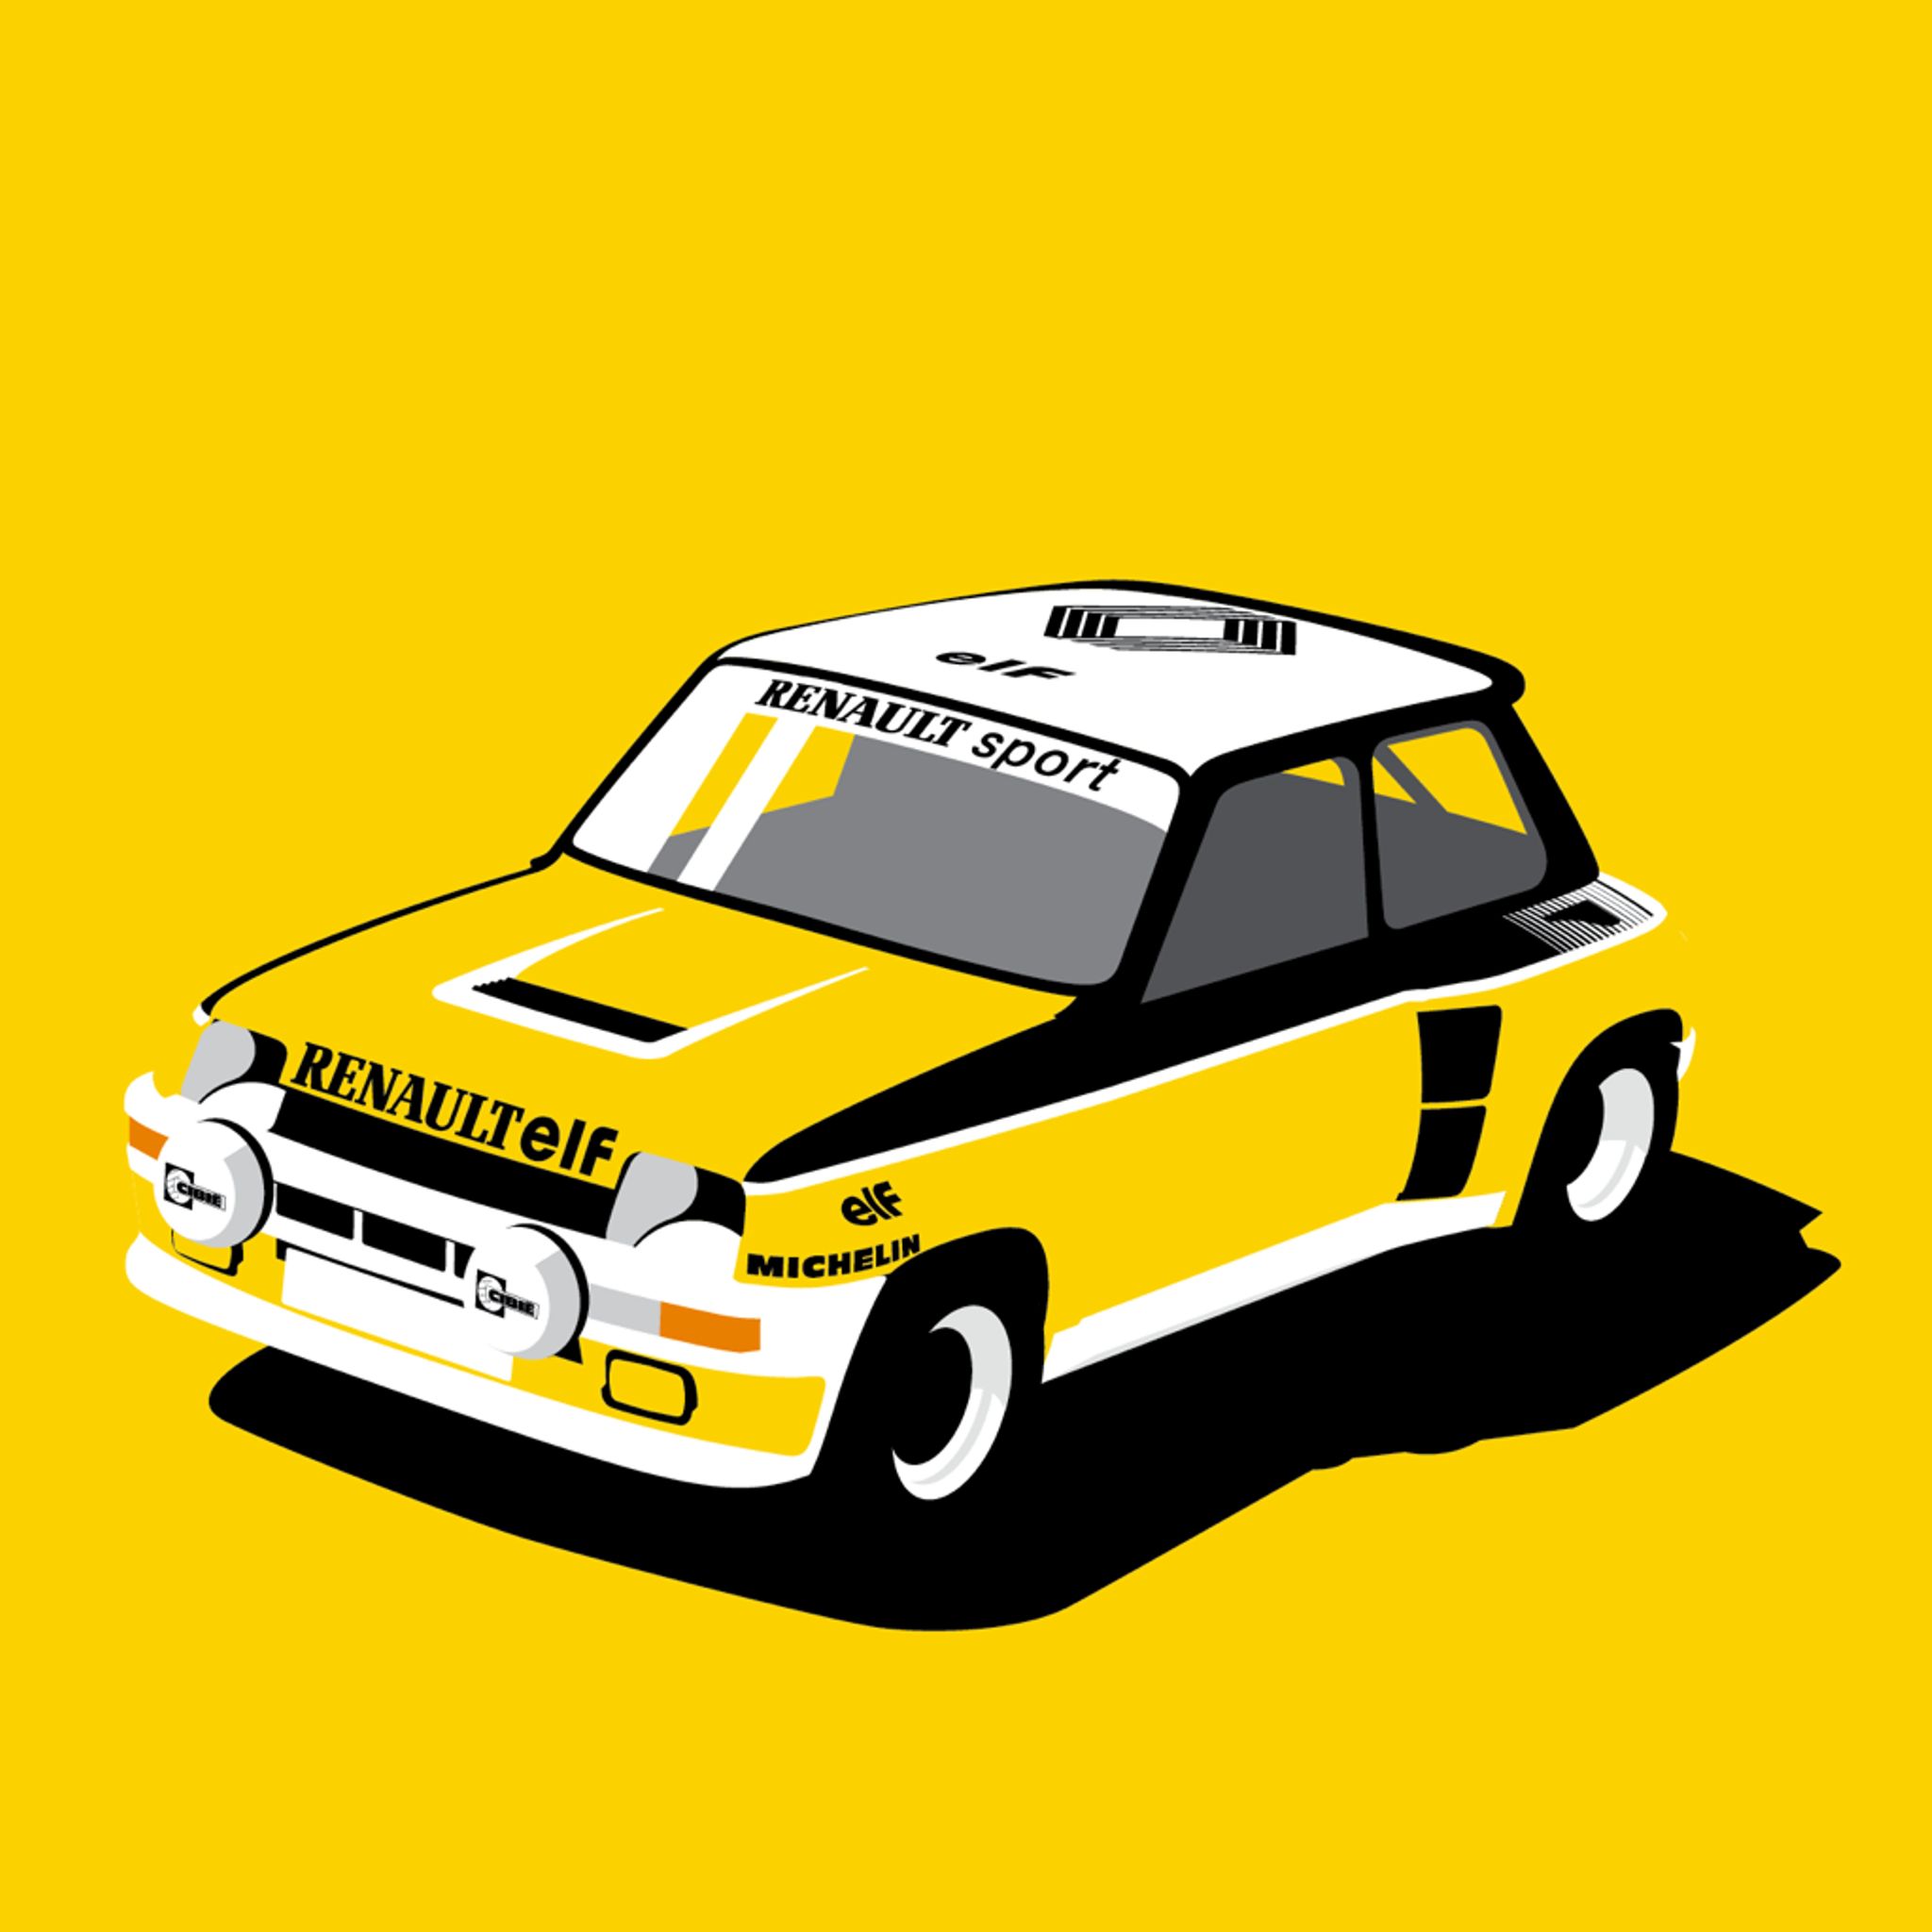 Brighten Up Your Week With This Awesome Renault 5 Turbo Wallpaper